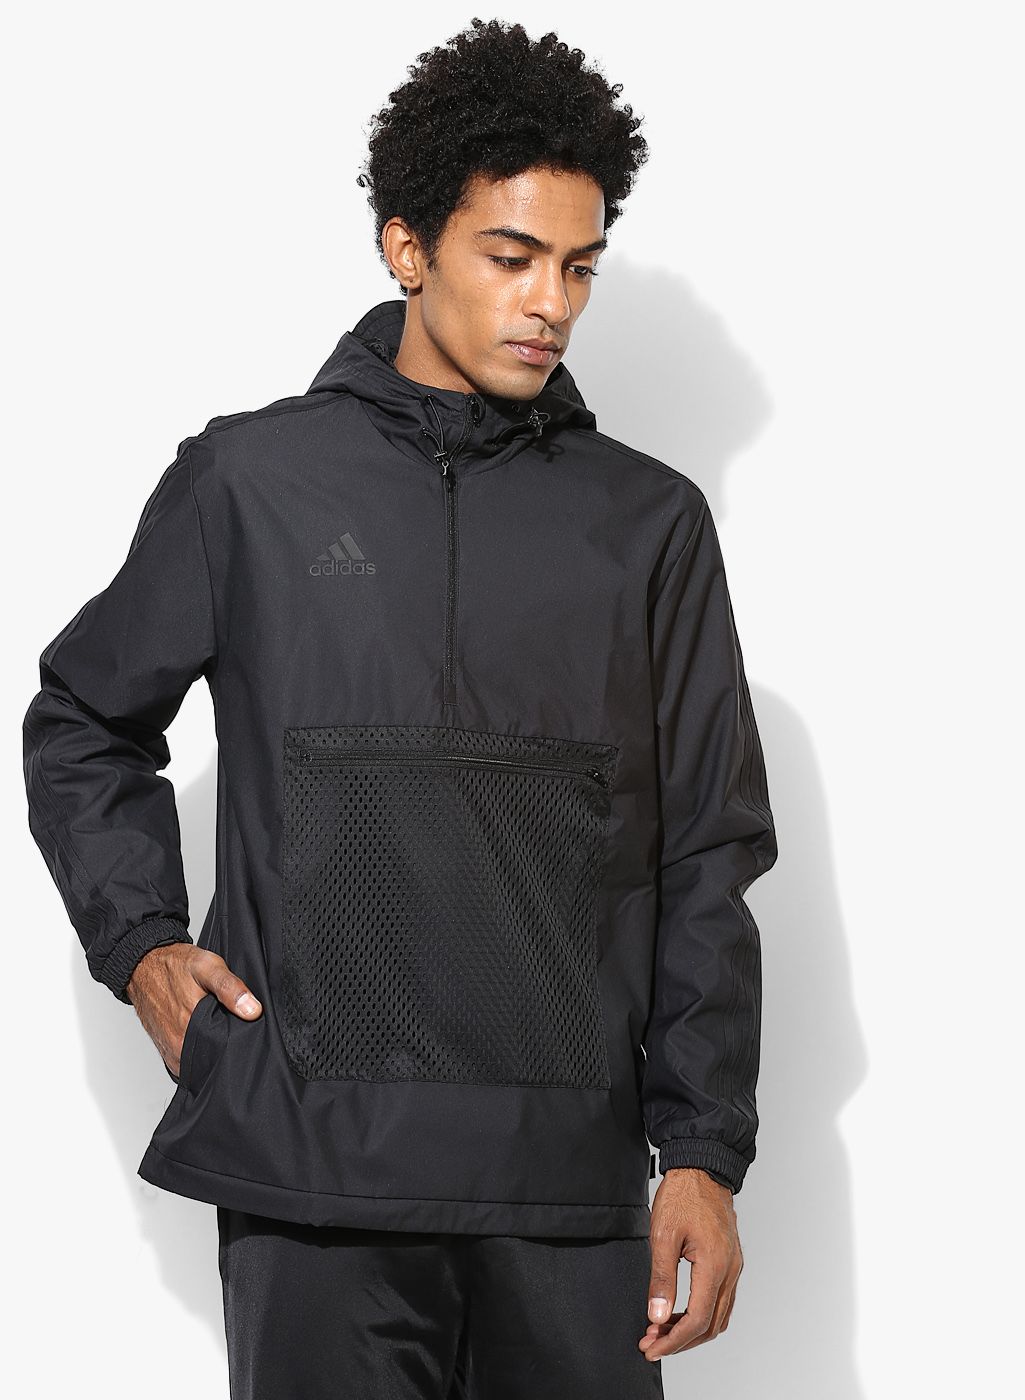 Adidas Jackets for Men - Buy Adidas Men Jackets Online in India ...